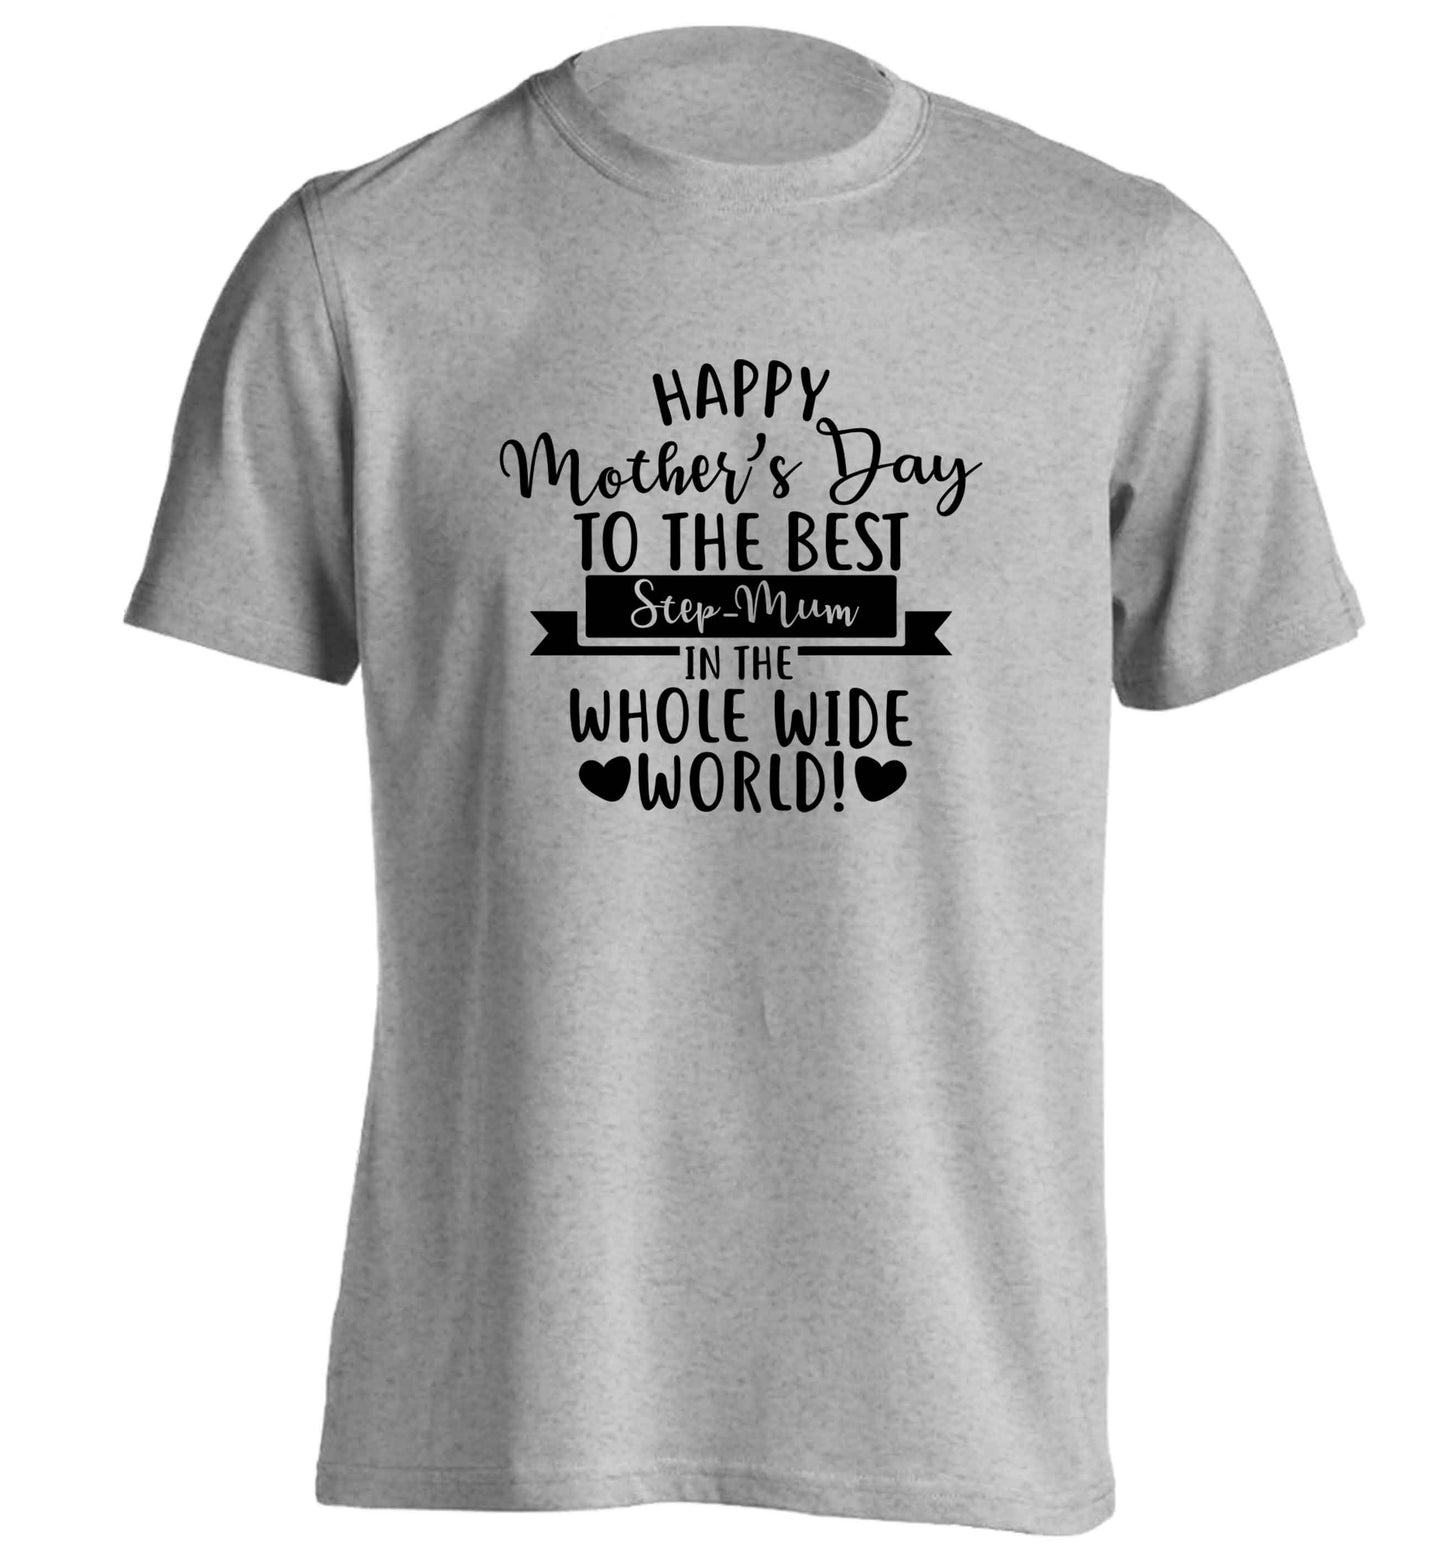 Happy mother's day to the best step-mum in the world adults unisex grey Tshirt 2XL